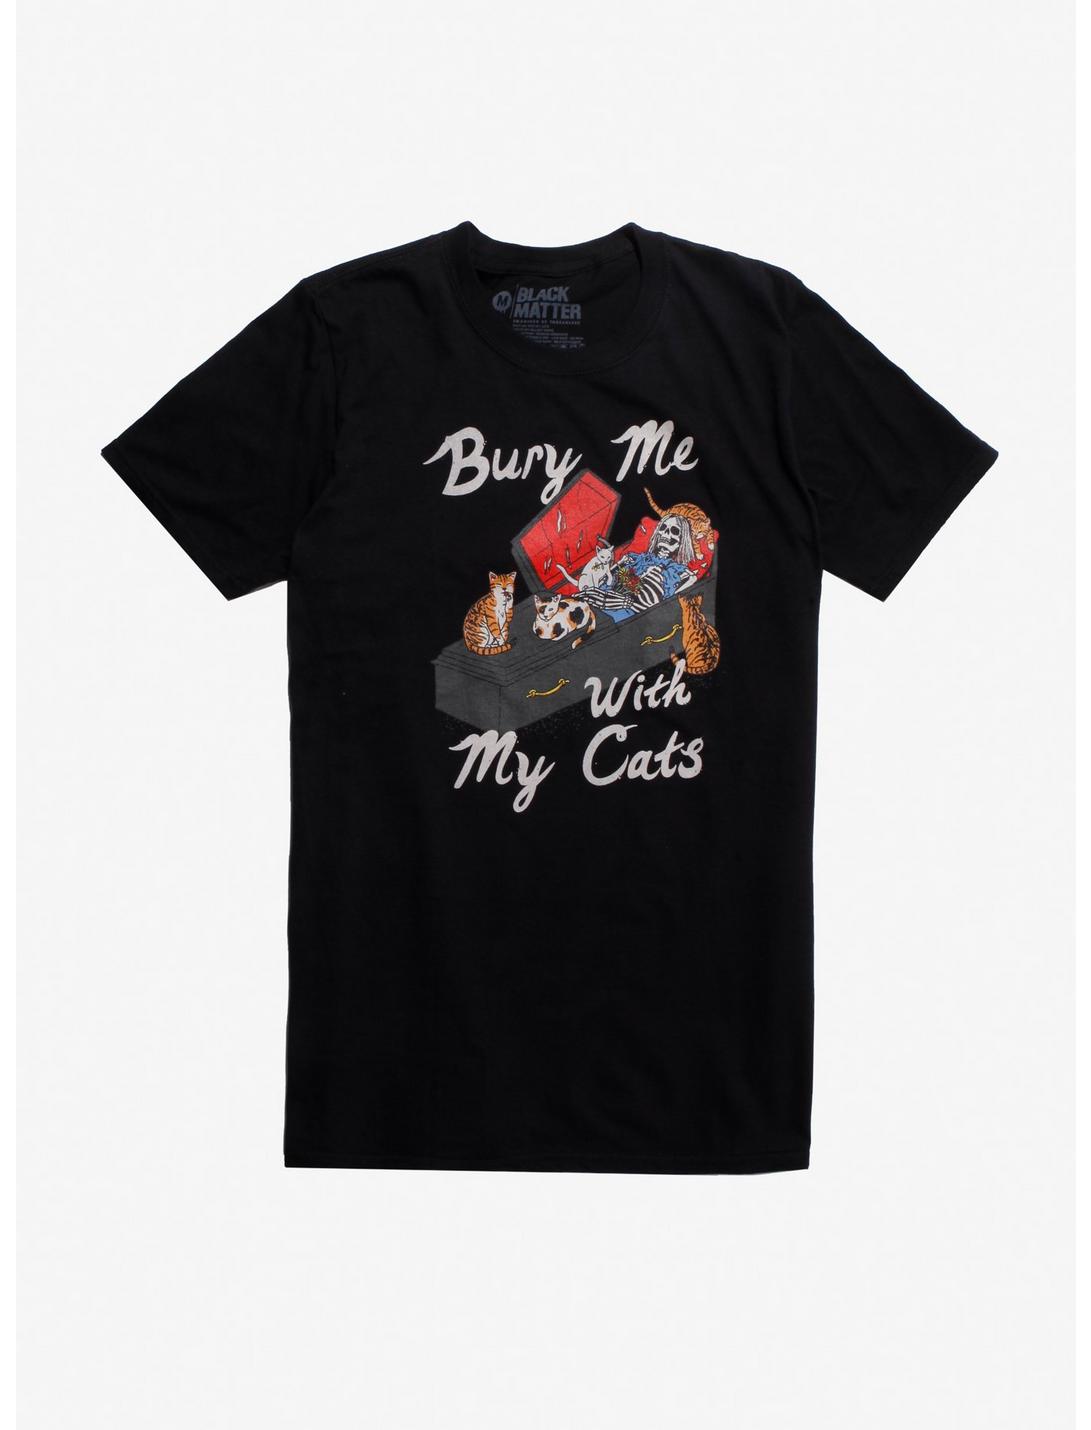 Bury Me With My Cats T-Shirt By Hillary White, BLACK, hi-res